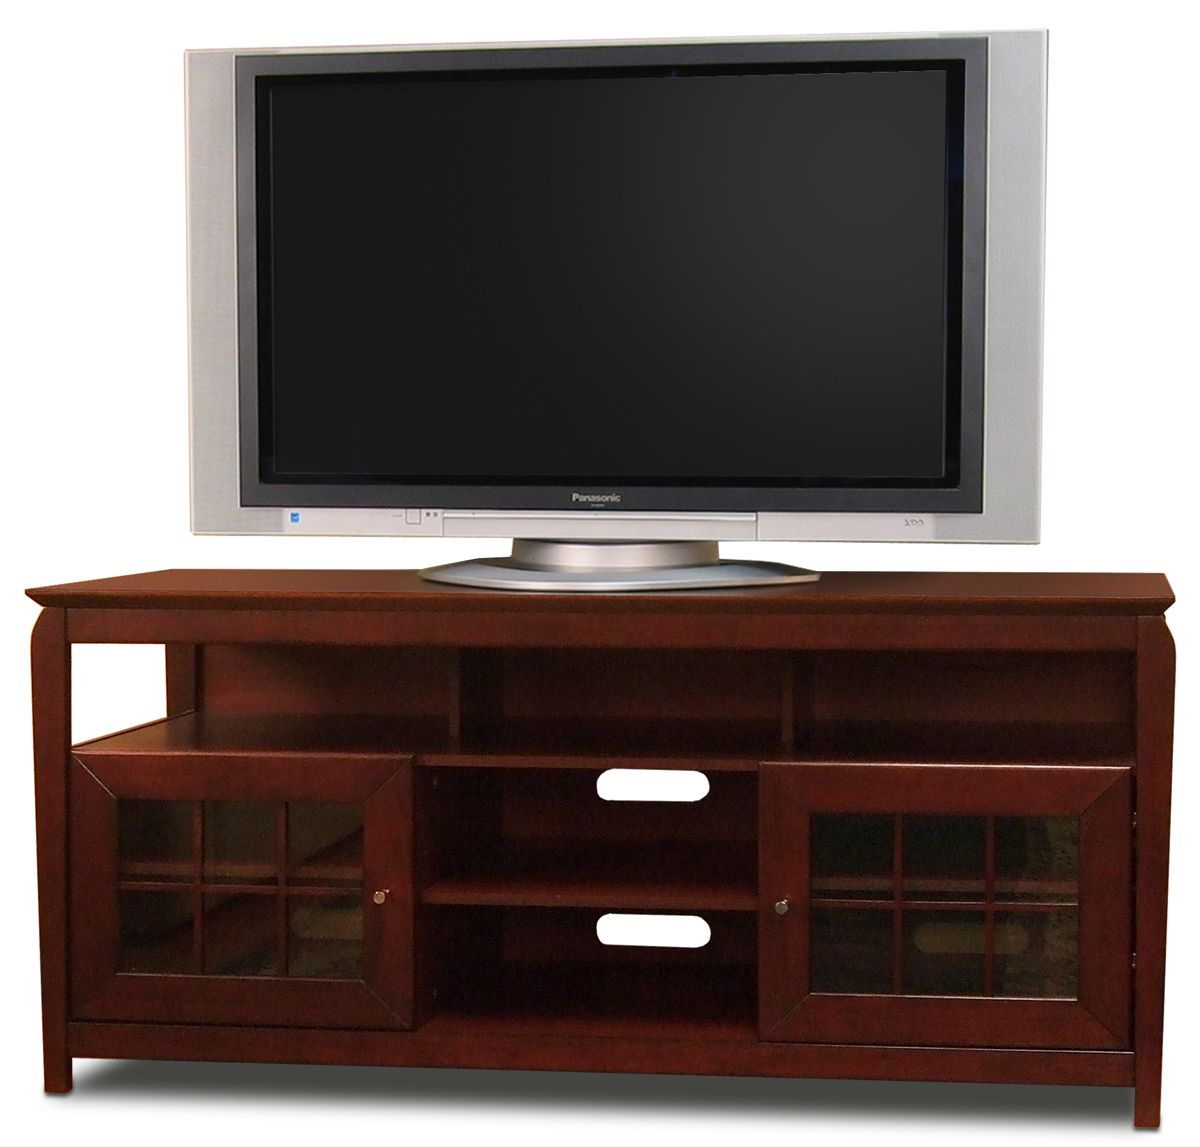 Techcraft Bay6028b Tv Stand Up To 60" Tvs (View 9 of 15)